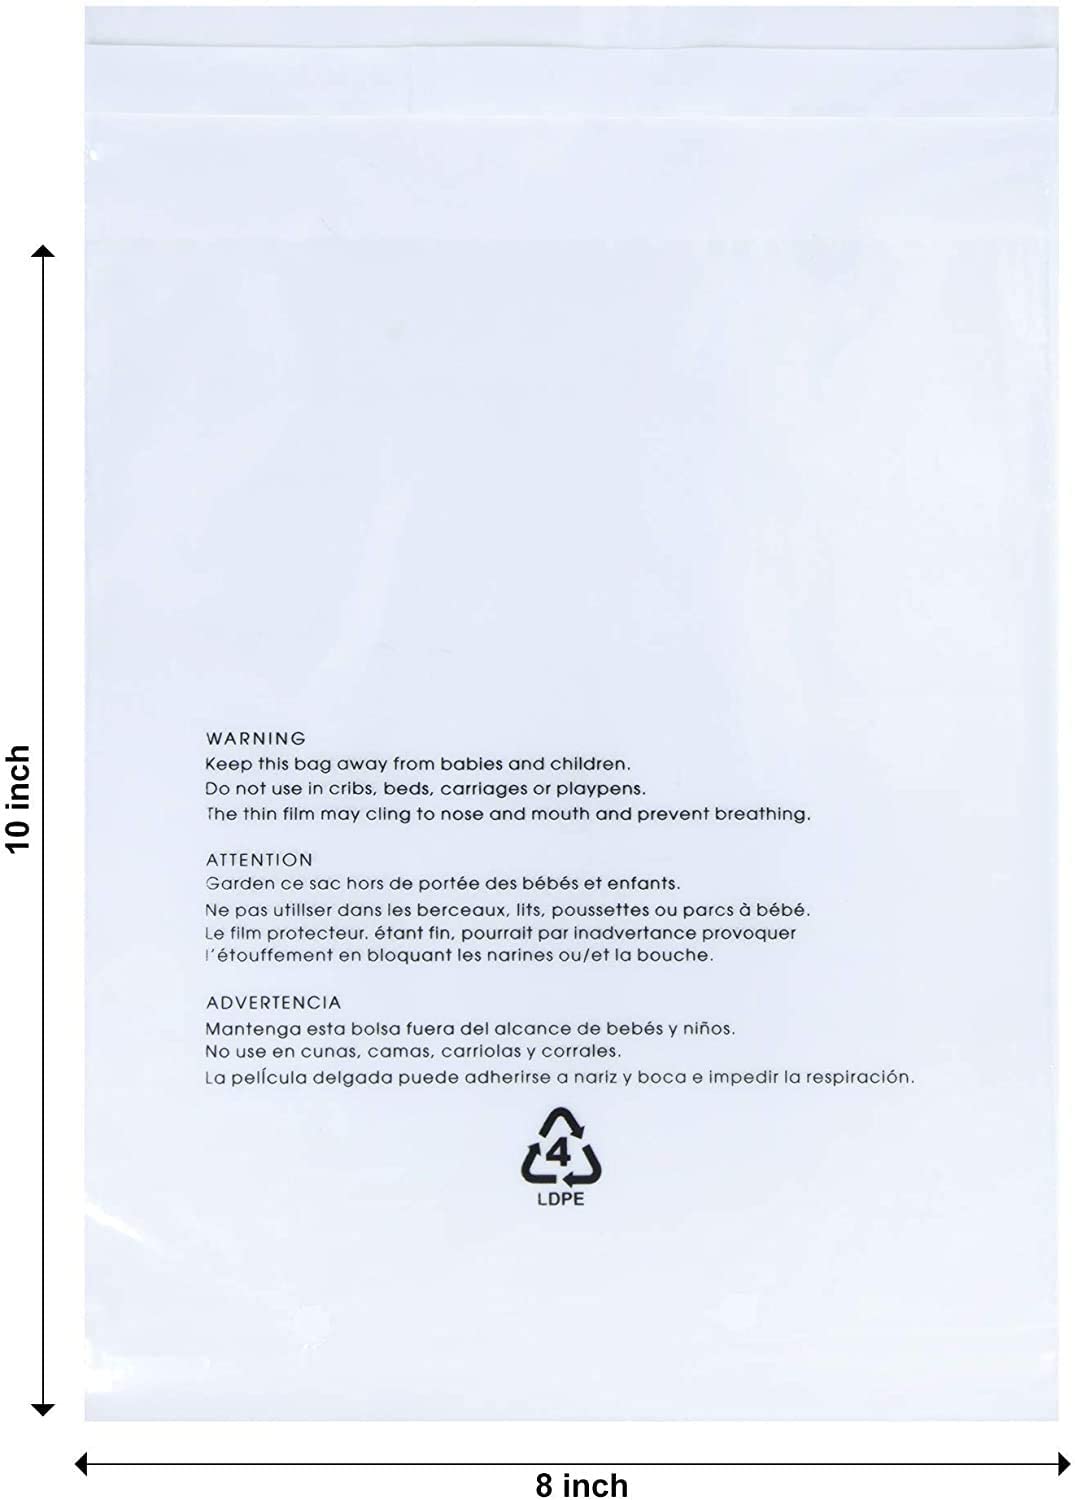 industrial clear plastic bag with suffocation warning printed